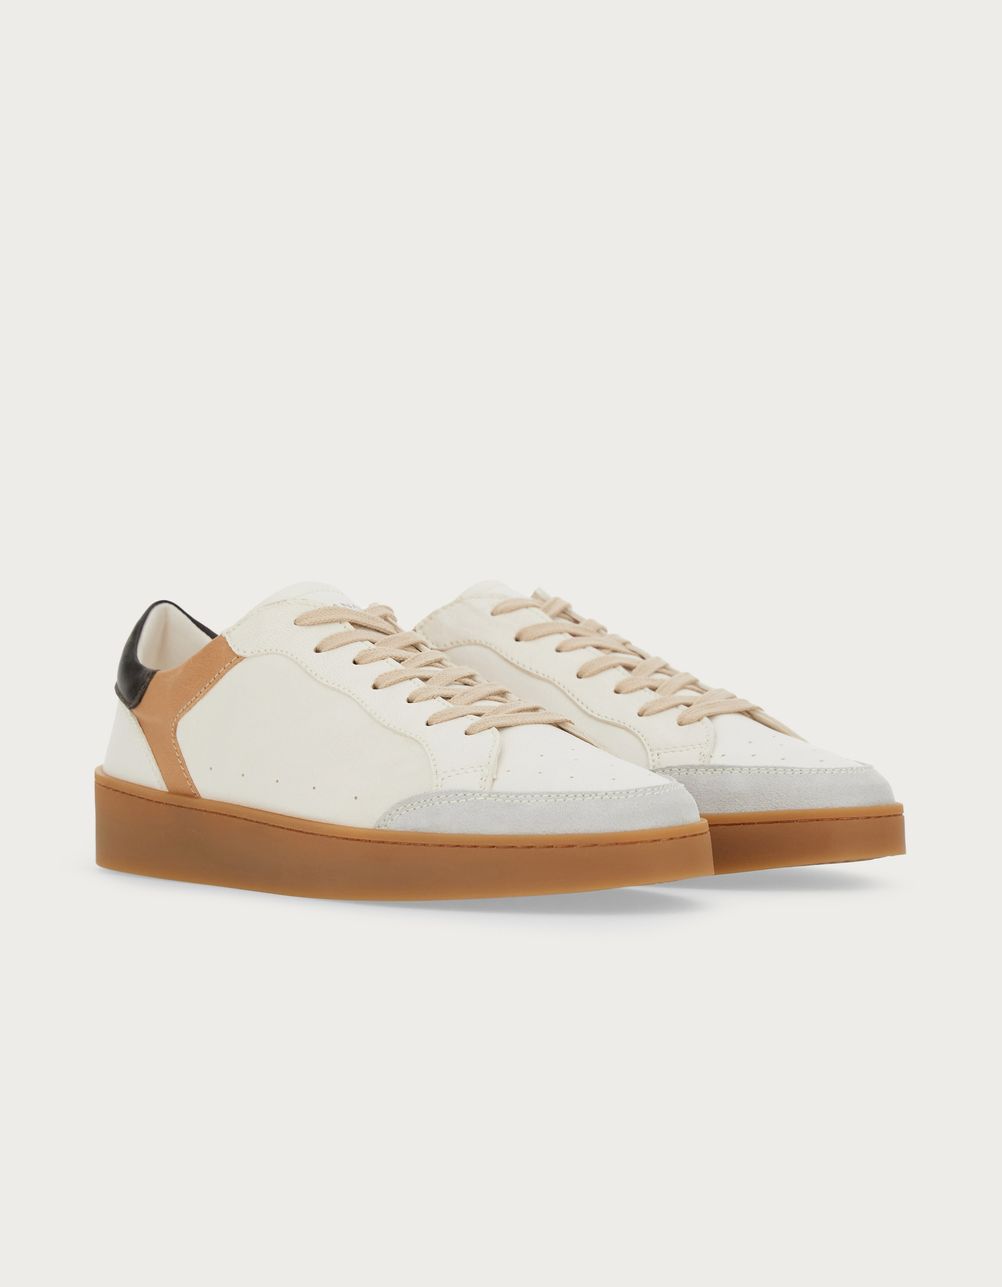 Cream and camel leather and suede sneakers